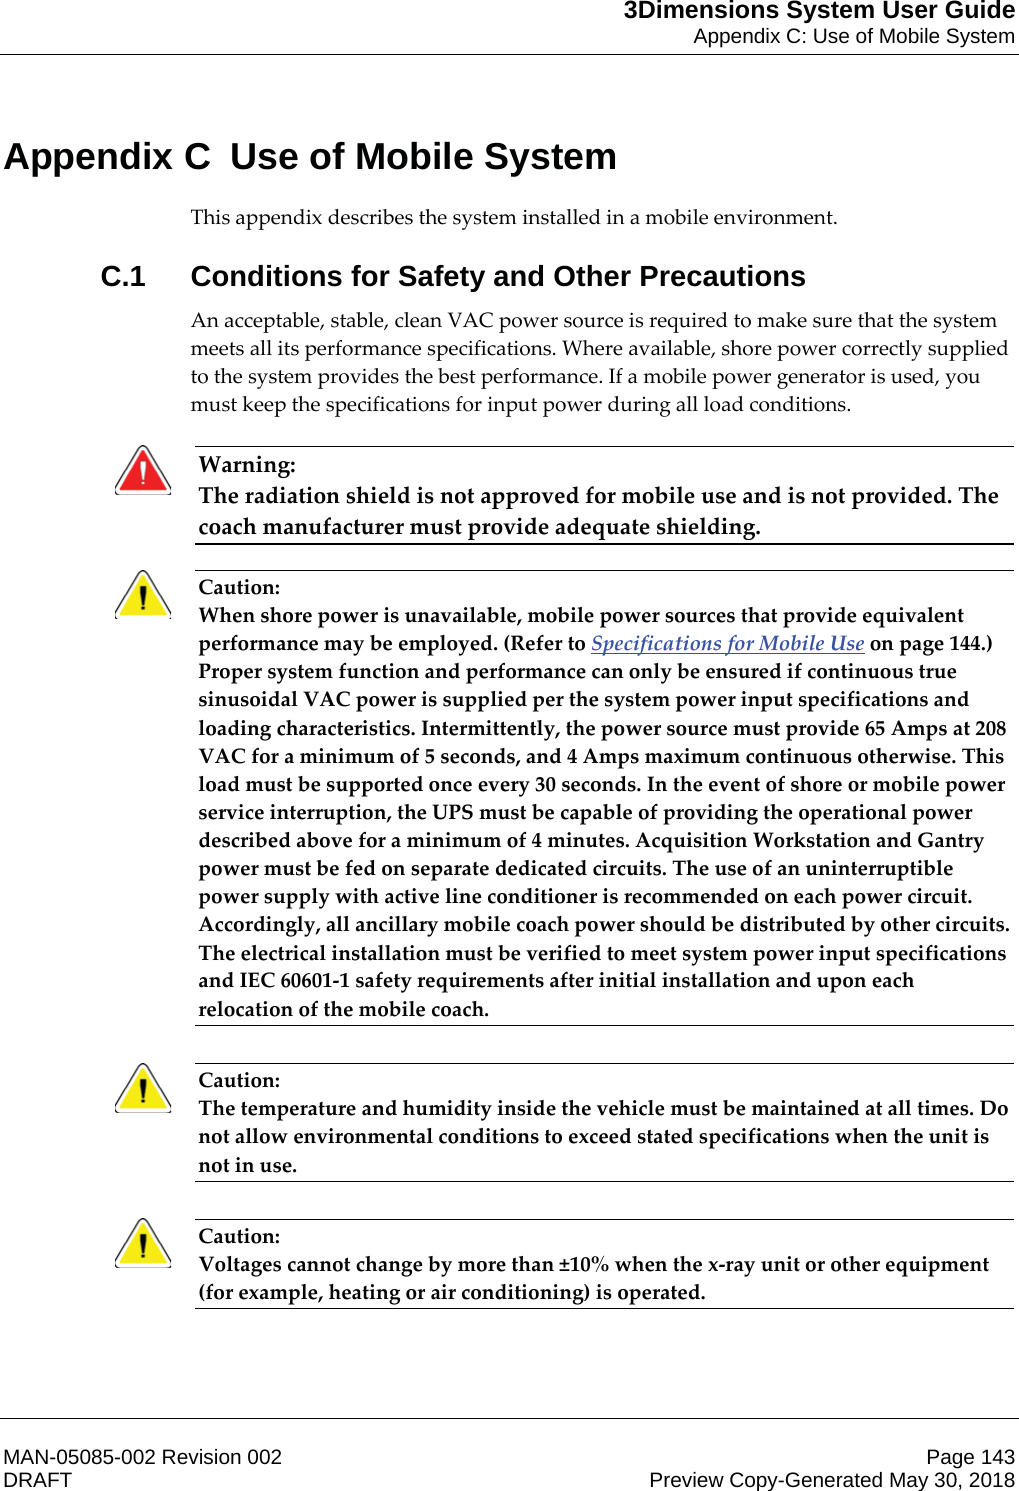 3Dimensions System User GuideAppendix C: Use of Mobile SystemMAN-05085-002 Revision 002 Page 143DRAFT Preview Copy-Generated May 30, 2018Appen dix C  Use of Mobile SystemThis appendix describes the system installed in a mobile environment. C.1  Conditions for Safety and Other PrecautionsAn acceptable, stable, clean VAC power source is required to make sure that the system meets all its performance specifications. Where available, shore power correctly supplied to the system provides the best performance. If a mobile power generator is used, you must keep the specifications for input power during all load conditions. Warning: The radiation shield is not approved for mobile use and is not provided. The coach manufacturer must provide adequate shielding.    Caution: When shore power is unavailable, mobile power sources that provide equivalent performance may be employed. (Refer to Specifications for Mobile Use on page 144.) Proper system function and performance can only be ensured if continuous true sinusoidal VAC power is supplied per the system power input specifications and loading characteristics. Intermittently, the power source must provide 65 Amps at 208 VAC for a minimum of 5 seconds, and 4 Amps maximum continuous otherwise. This load must be supported once every 30 seconds. In the event of shore or mobile power service interruption, the UPS must be capable of providing the operational power described above for a minimum of 4 minutes. Acquisition Workstation and Gantry power must be fed on separate dedicated circuits. The use of an uninterruptible power supply with active line conditioner is recommended on each power circuit. Accordingly, all ancillary mobile coach power should be distributed by other circuits. The electrical installation must be verified to meet system power input specifications and IEC 60601-1 safety requirements after initial installation and upon each relocation of the mobile coach.    Caution: The temperature and humidity inside the vehicle must be maintained at all times. Do not allow environmental conditions to exceed stated specifications when the unit is not in use.    Caution: Voltages cannot change by more than ±10% when the x-ray unit or other equipment (for example, heating or air conditioning) is operated.     Appendix C